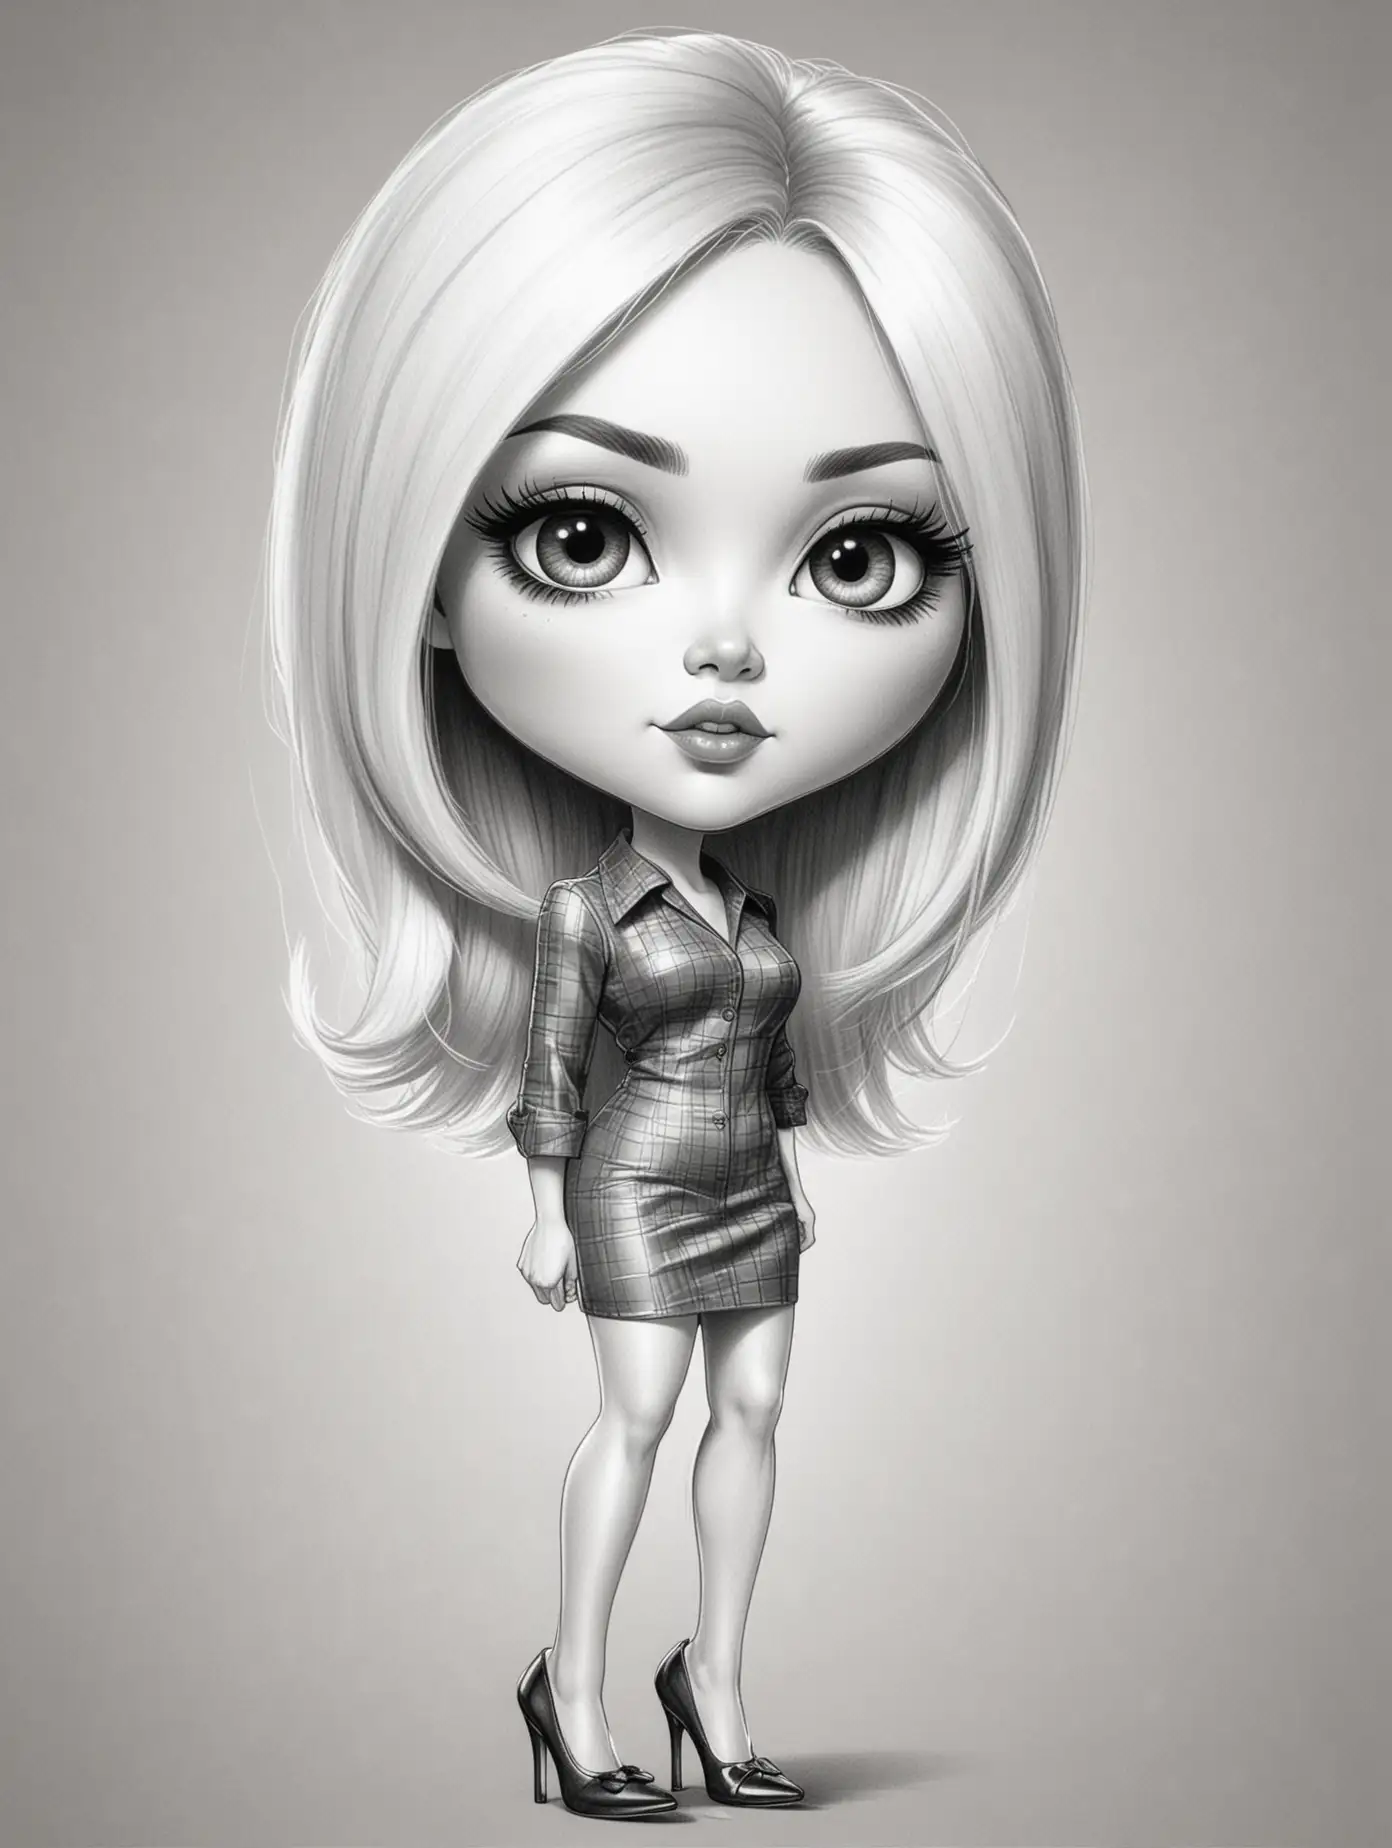 Black and white pencil drawn caricature of a beautiful grown-up woman, chibi style, with long straight white hair in a short bob, almond eyes, pointy chin, she is dressed in 1970s disco diva style, high heels, full length, she looks serious